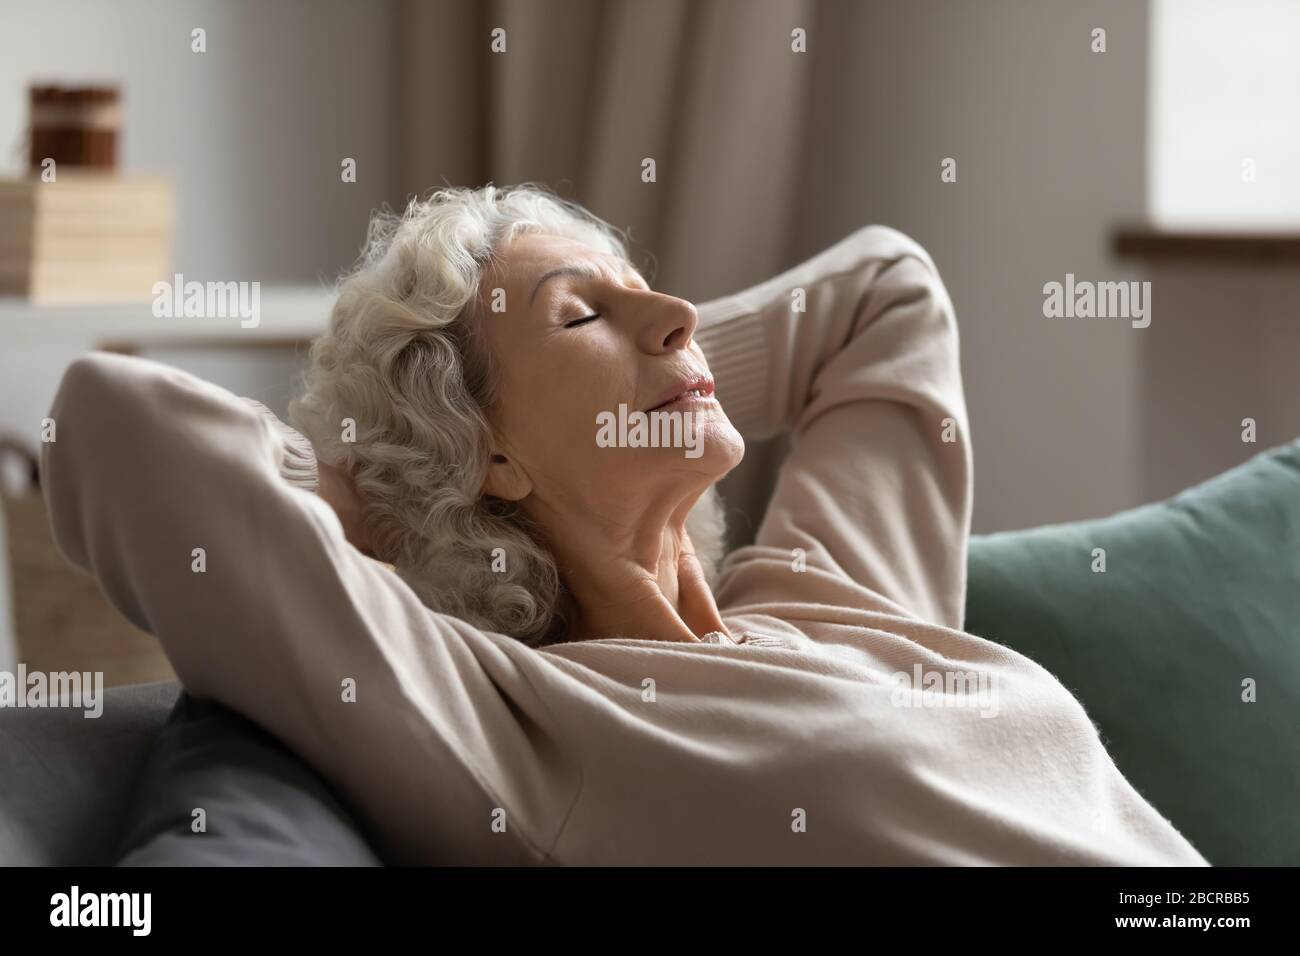 Serene middle aged woman daydreaming on couch. Stock Photo